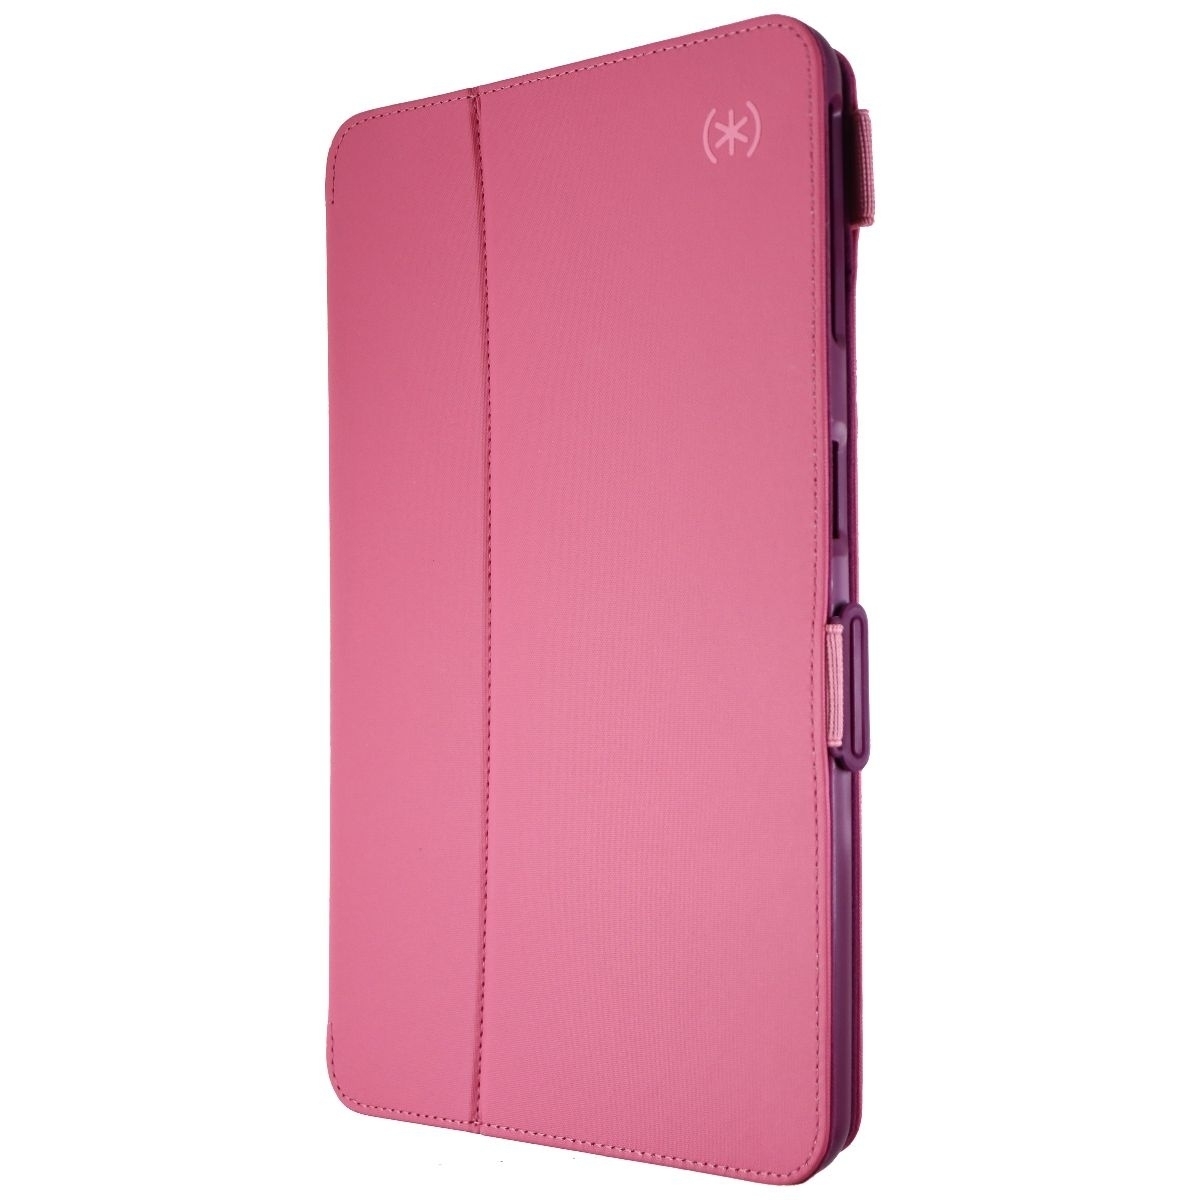 Speck Balance Folio Case & Stand For LG G Pad 5 (10.1 FHD) - Pink